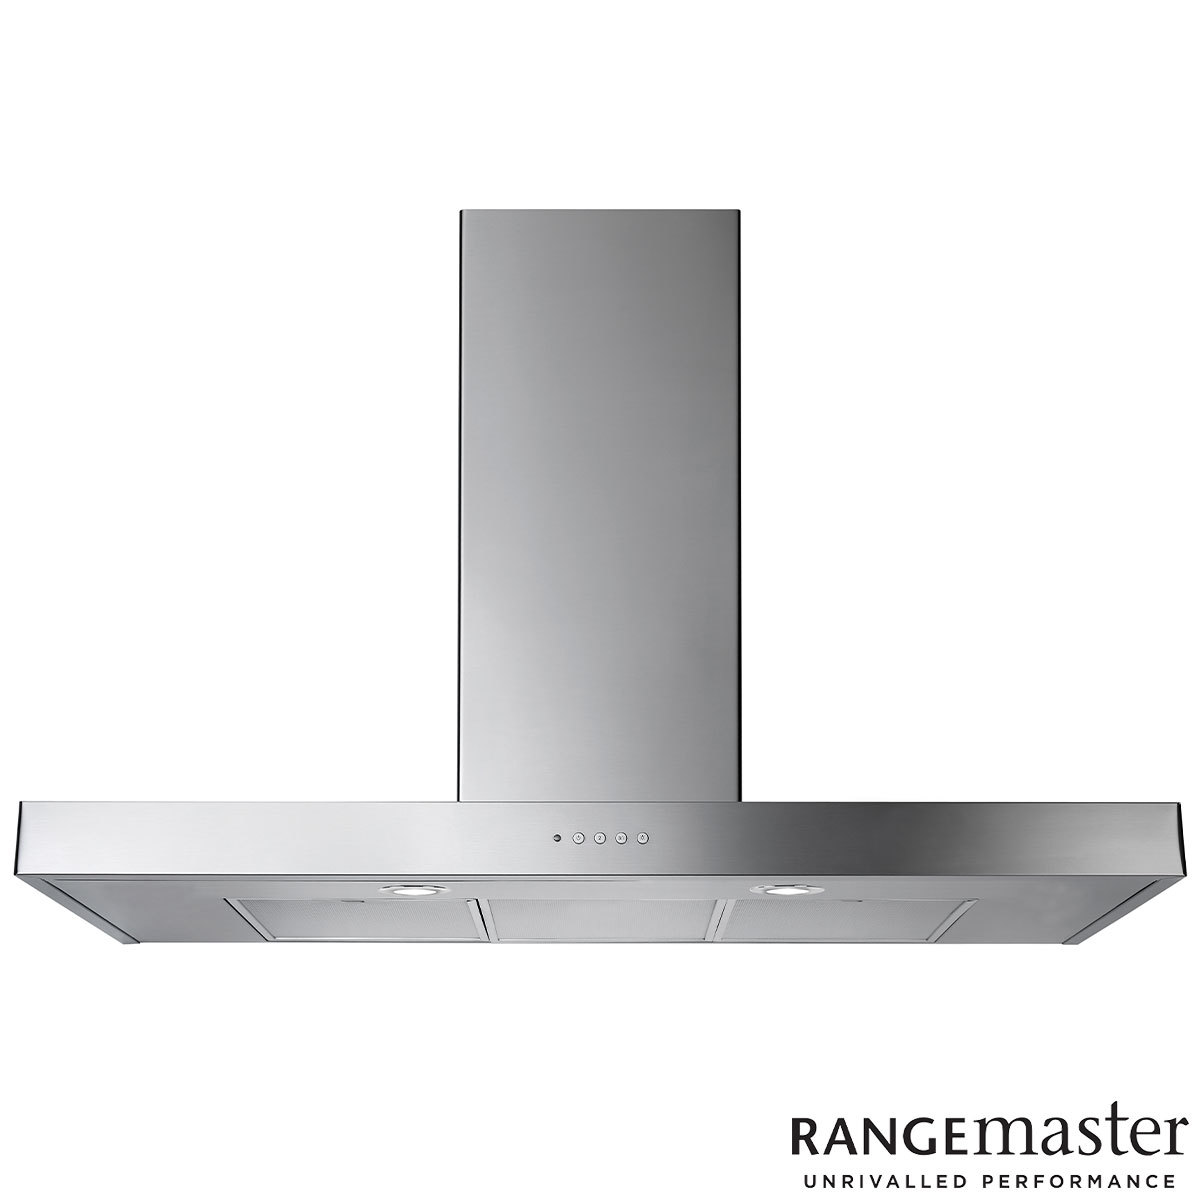 Rangemaster Professional UNBHDS90SS/ Chimney Cooker Hood, B Rated in Stainless Steel